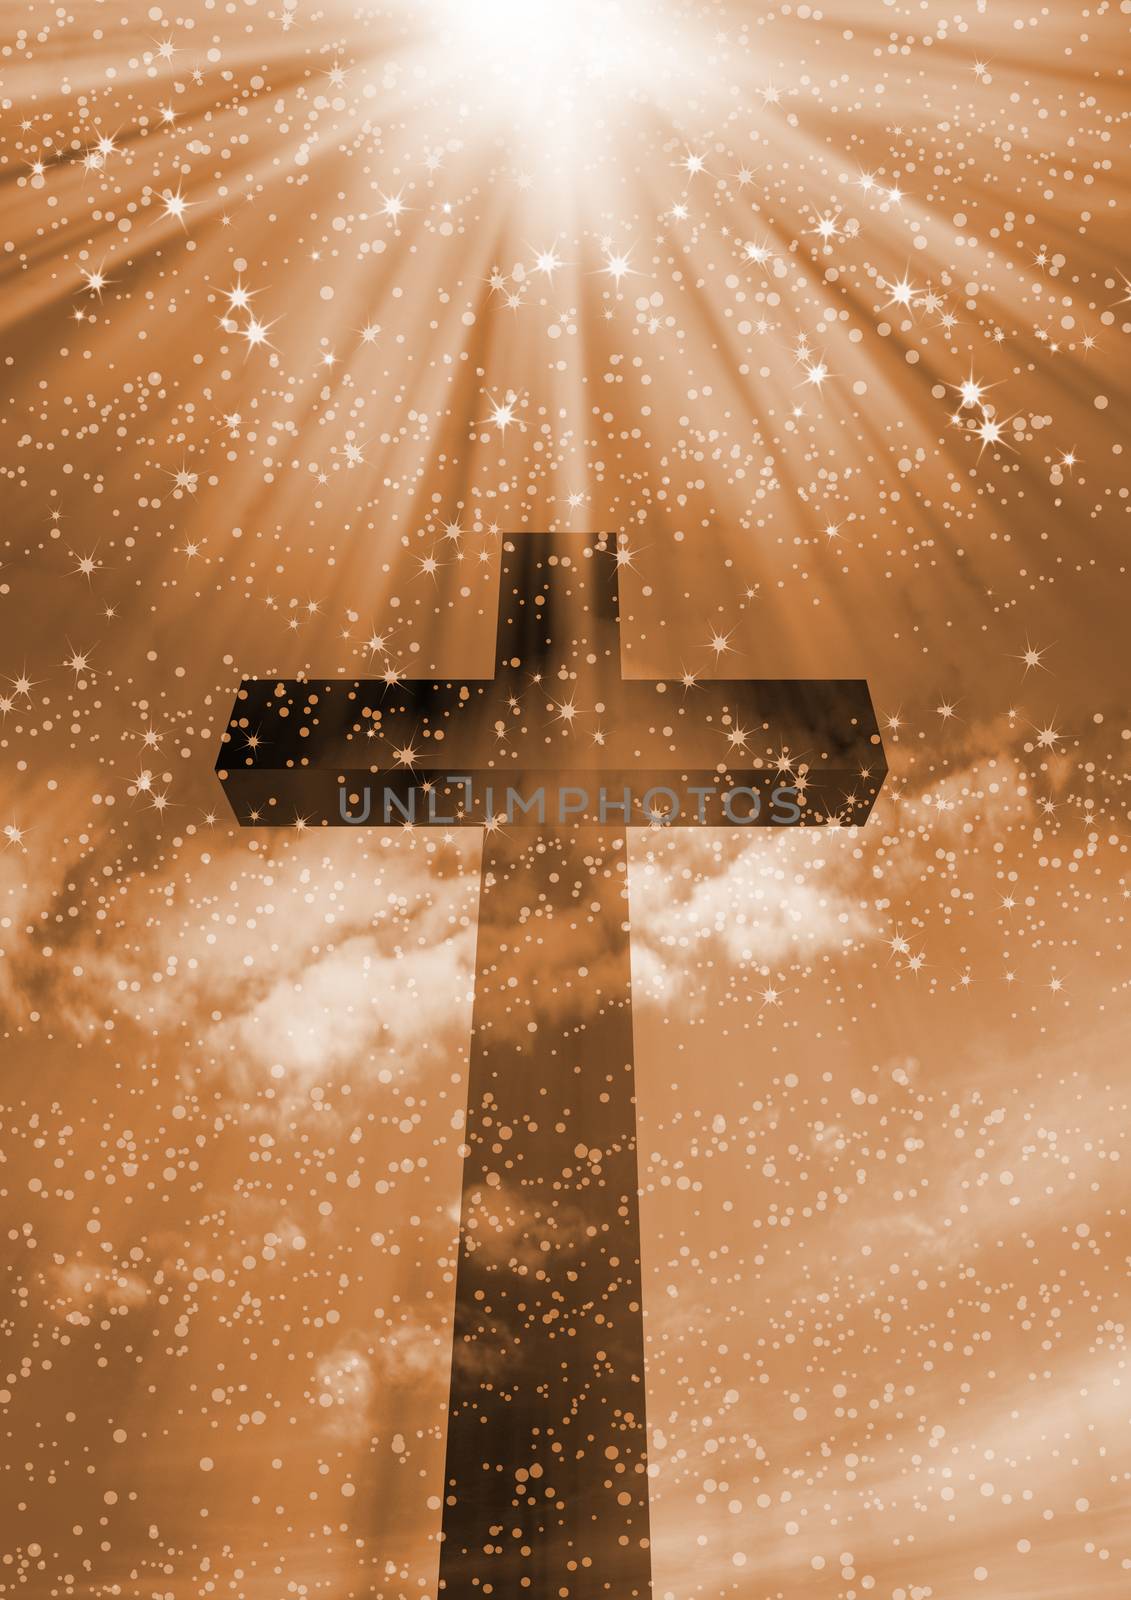 The cross with clouds background- Christian cross